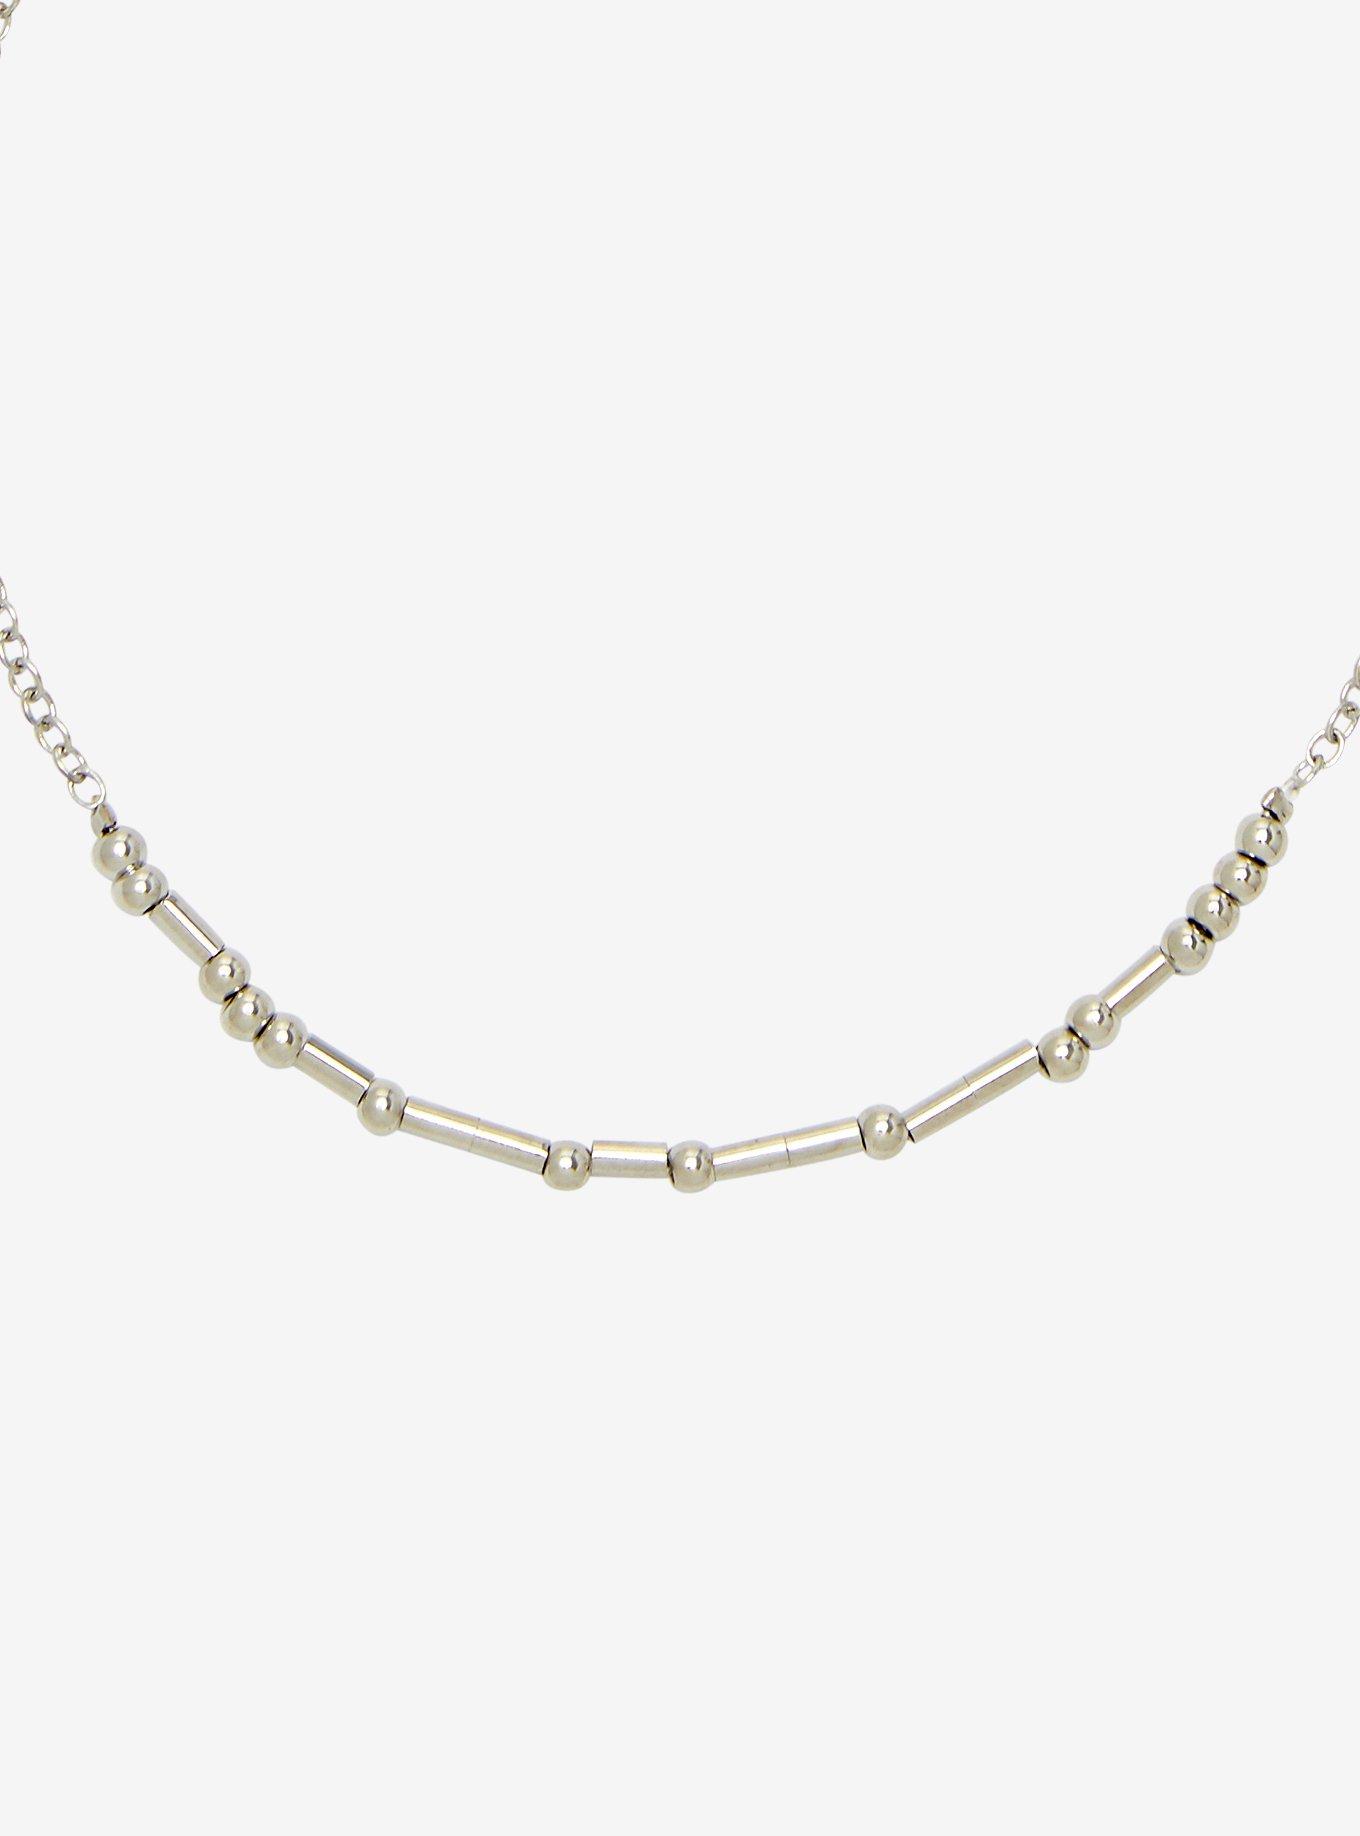 Morse Code F Yes Necklace, , hi-res